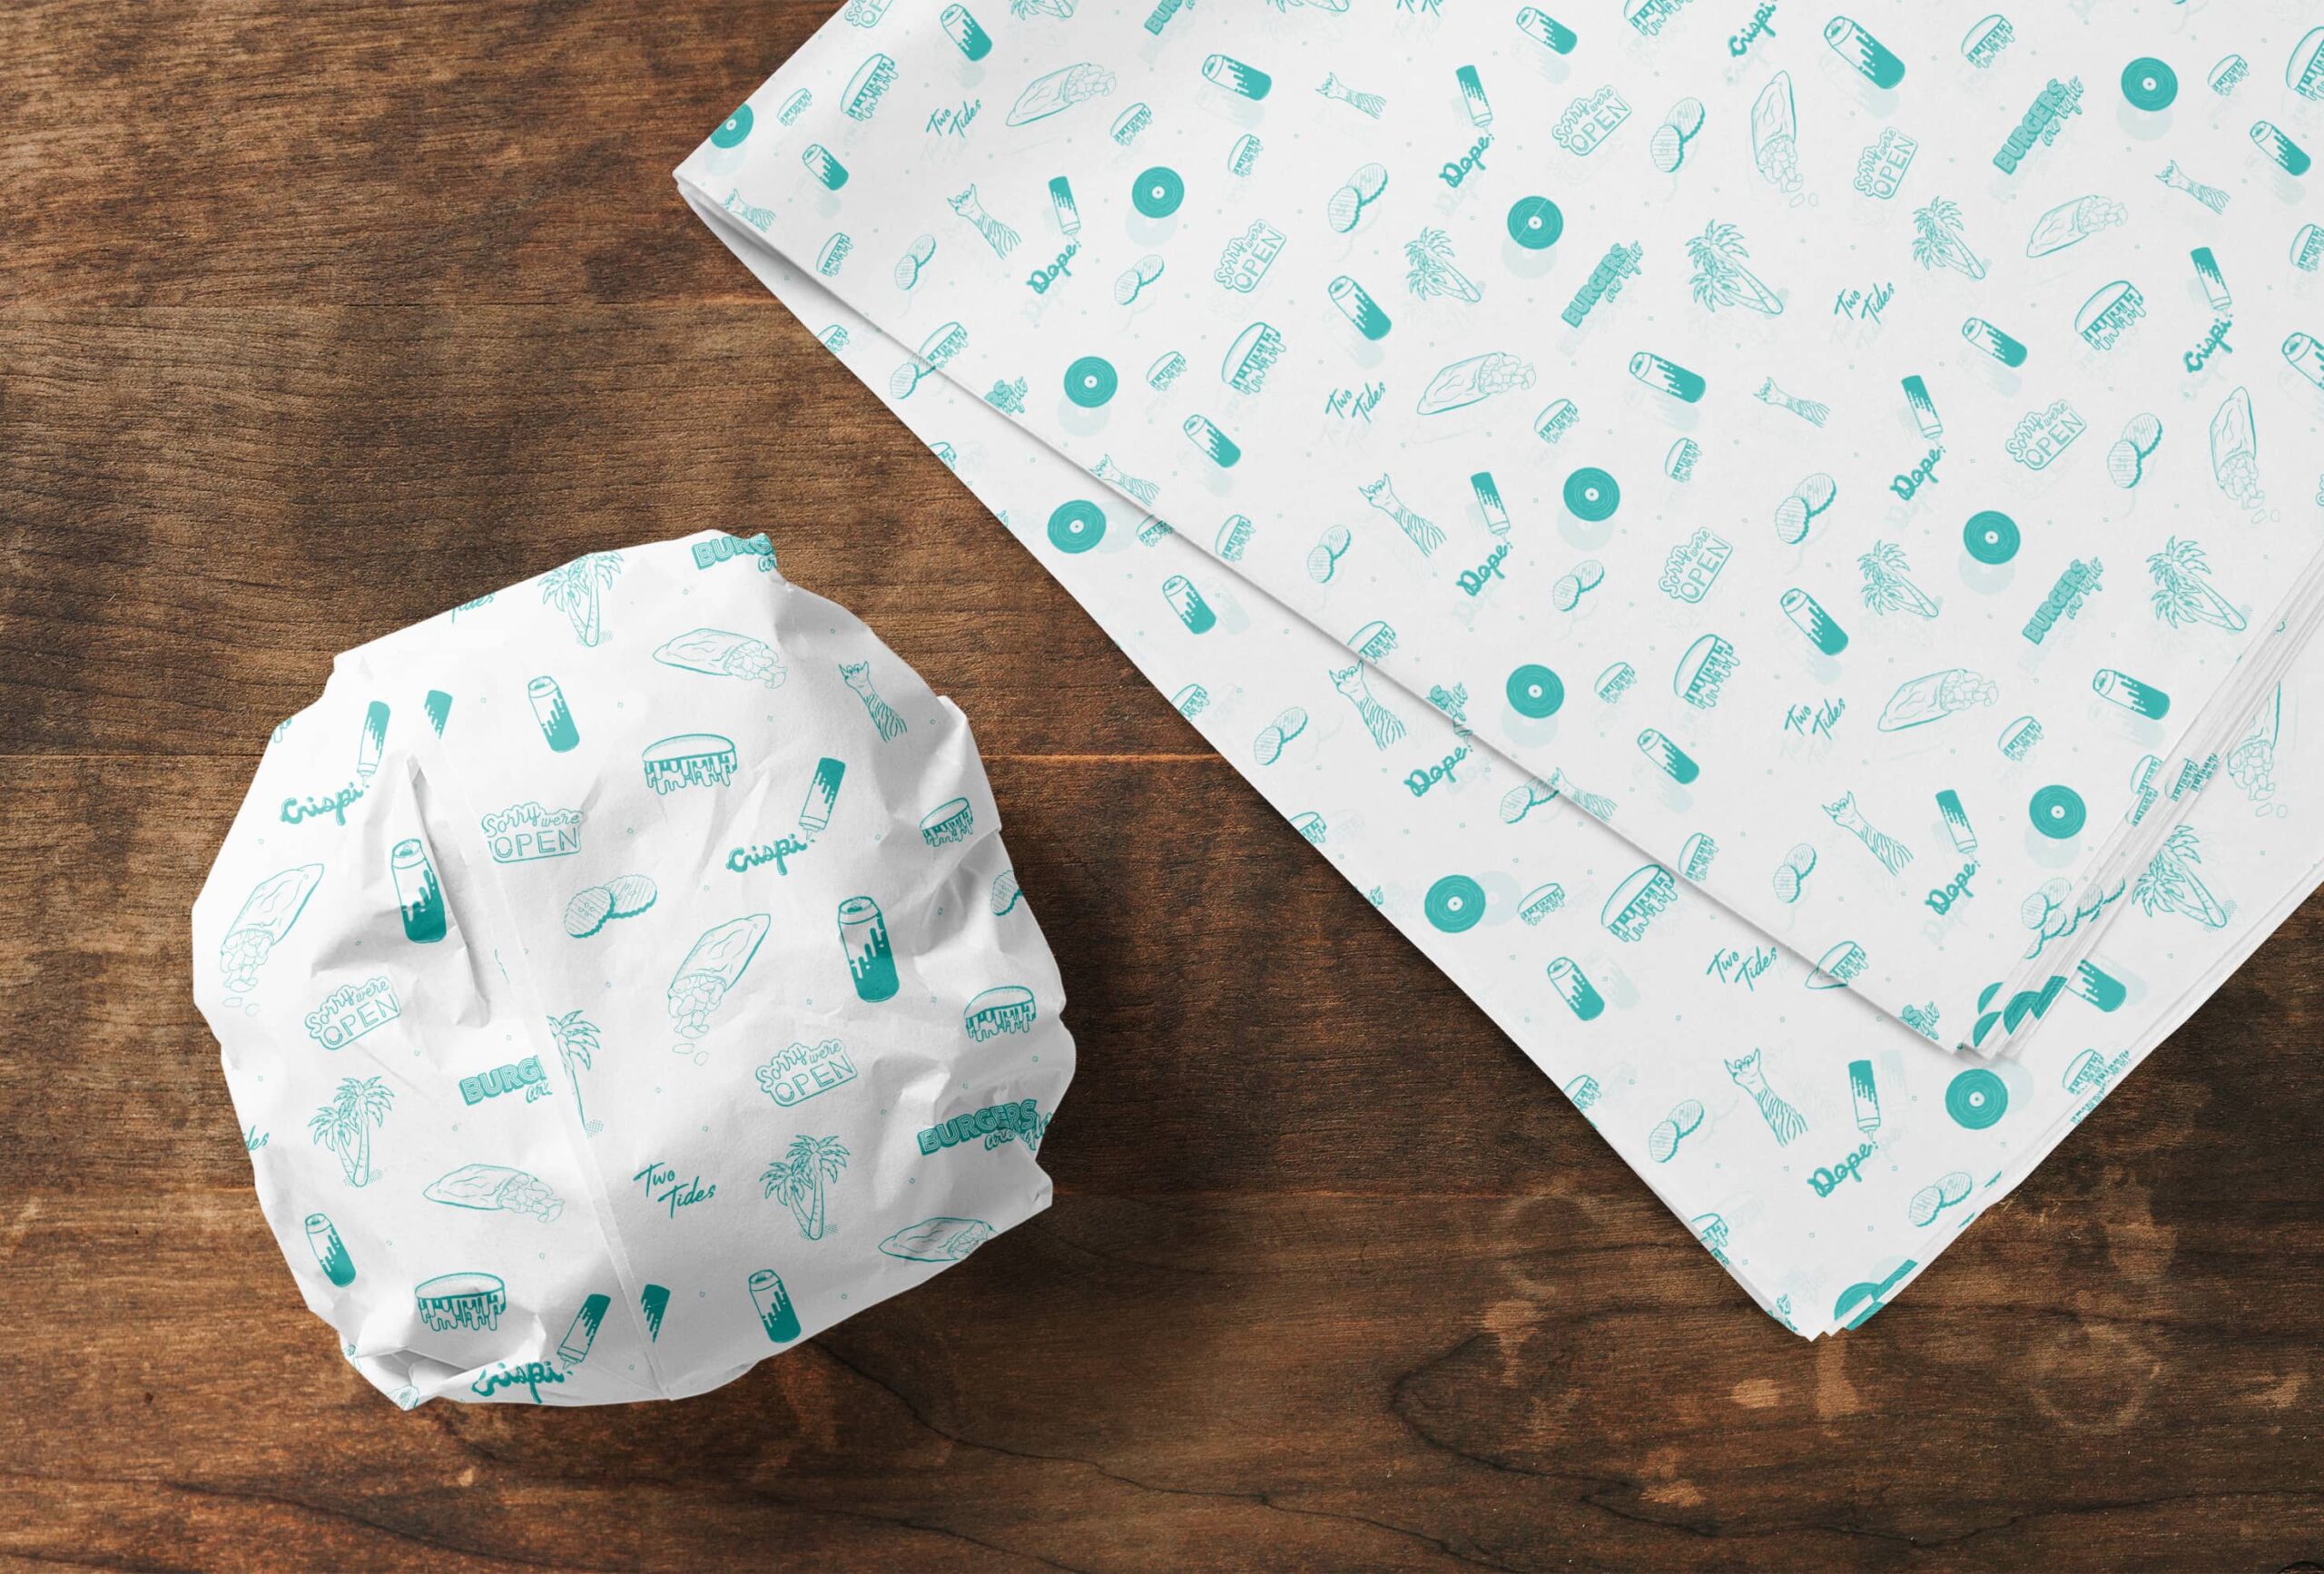 Brand pattern design for Two Tides Crispi by Olive Ridley Studios: custom printed deli paper sitting next to a wrapped burger